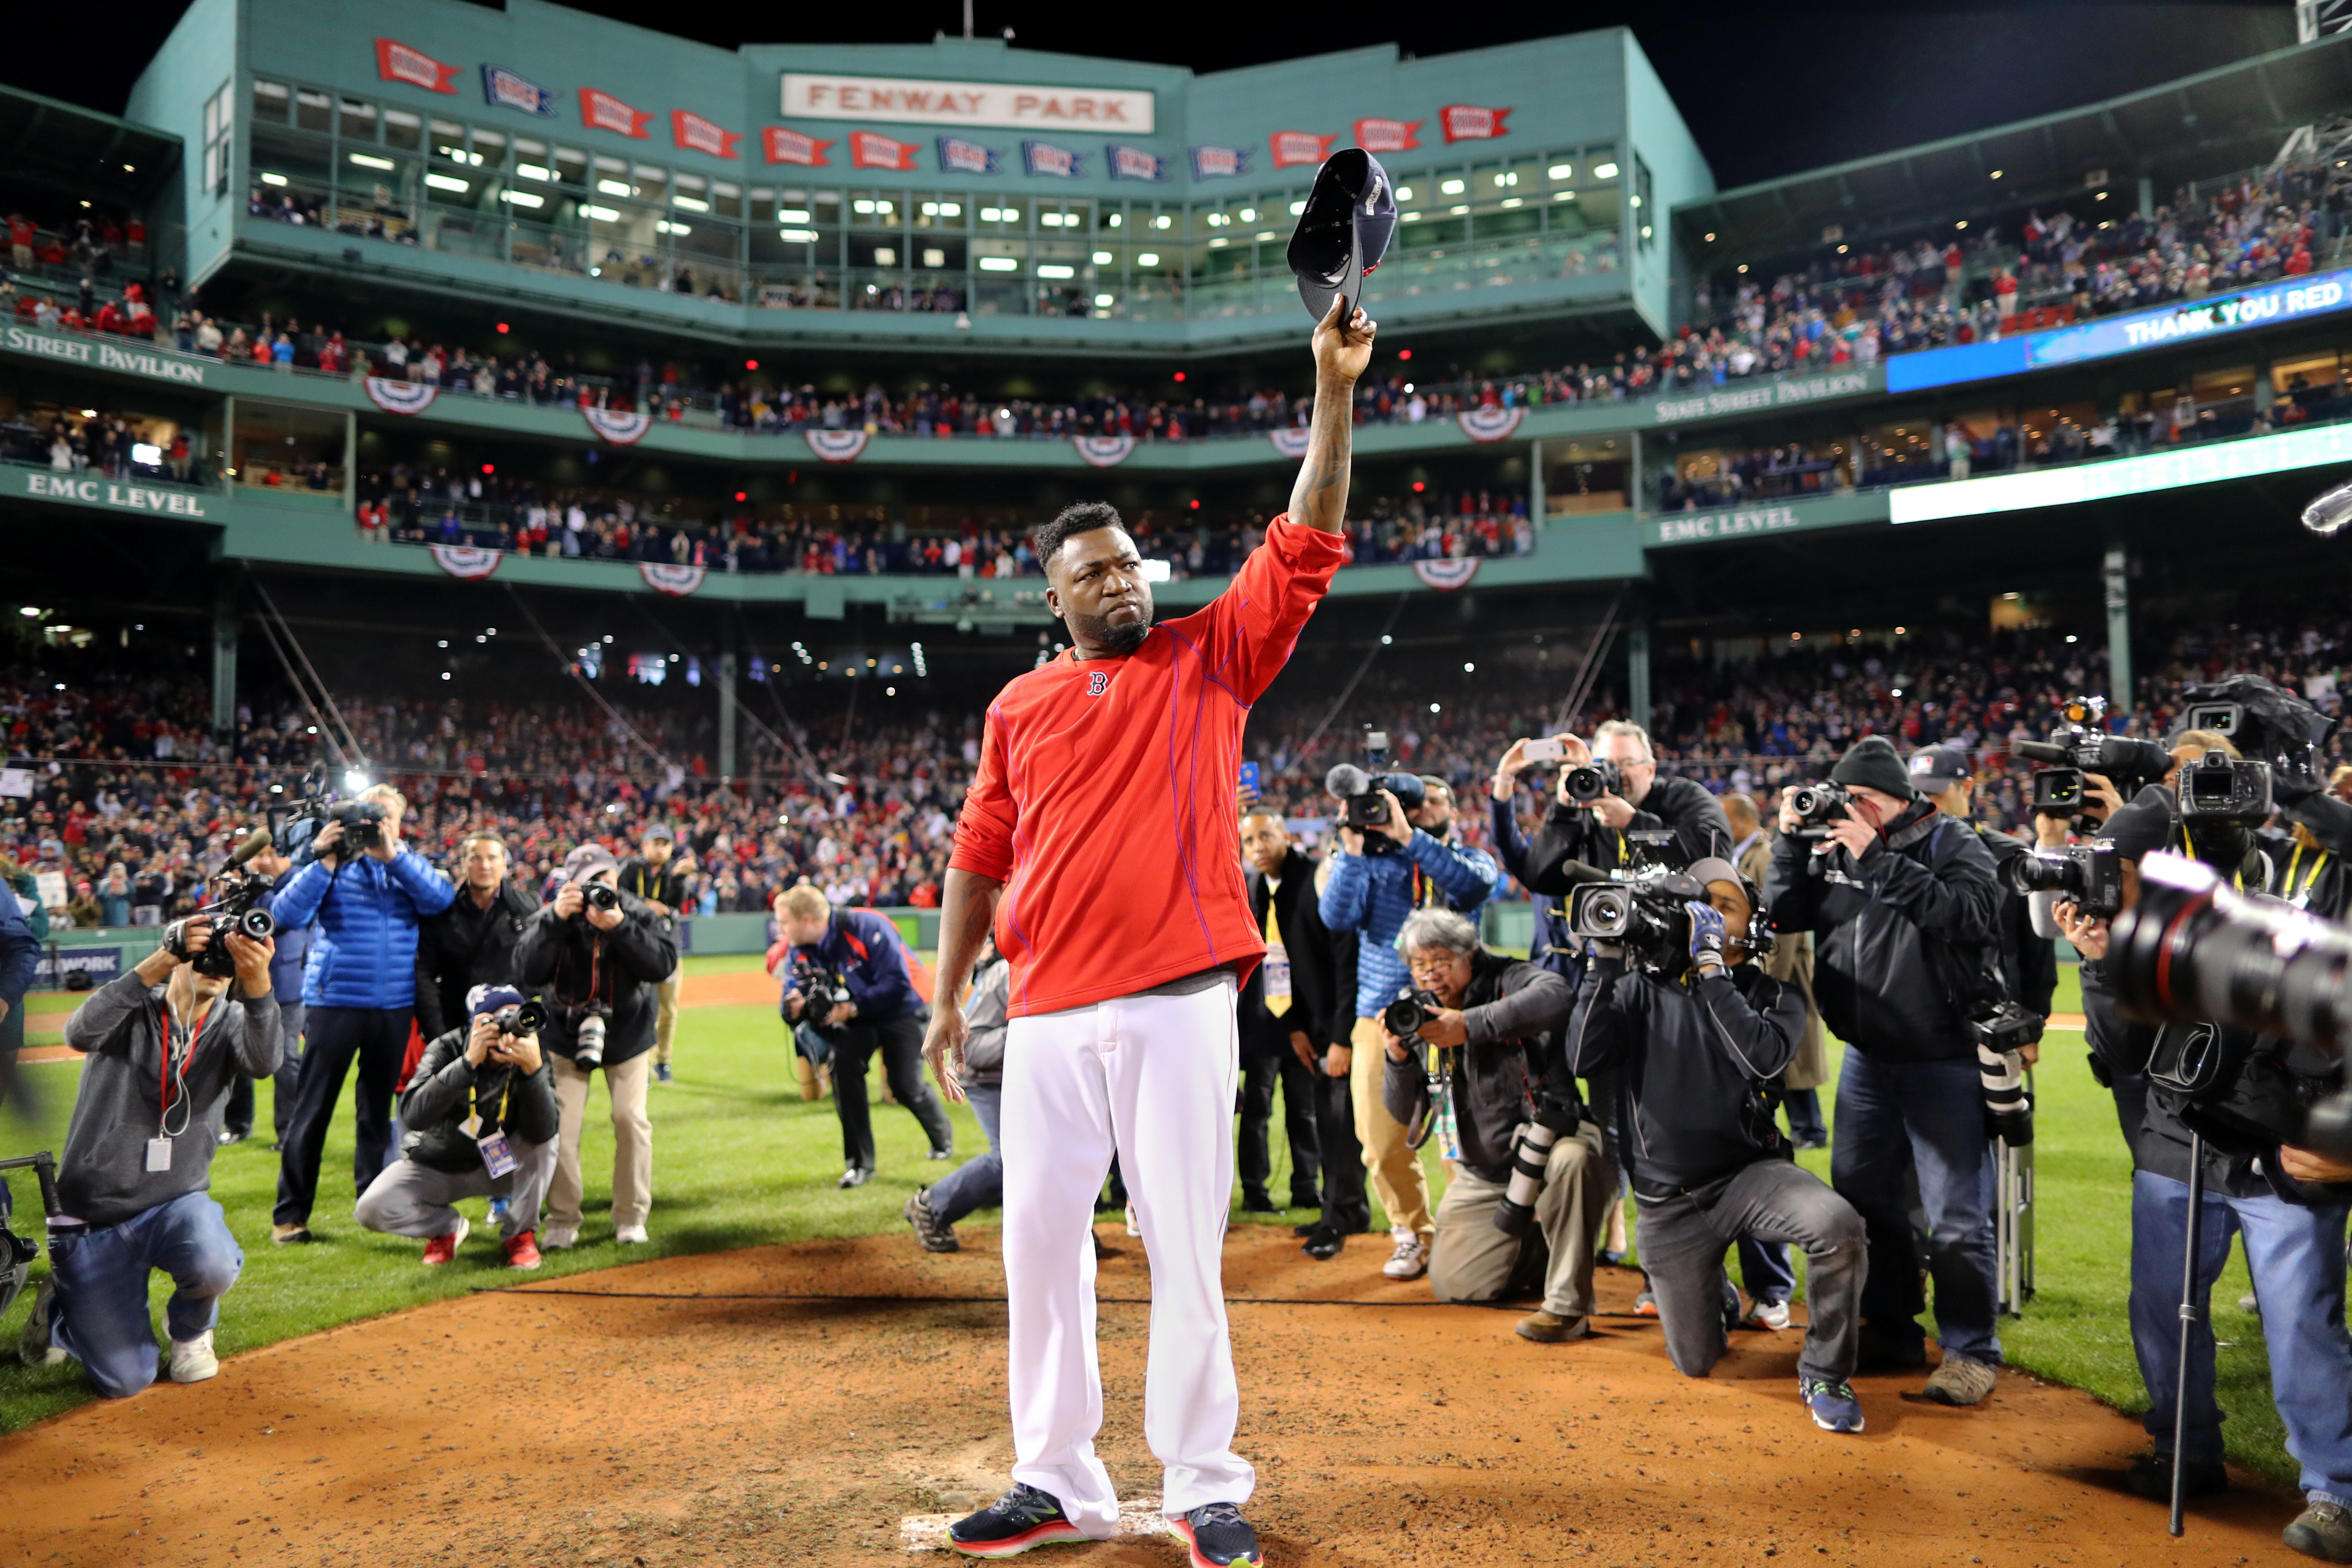 Ortiz salutes the fans one last time at Fenway Park after the Indians knocked the Red Sox out of the playoffs.